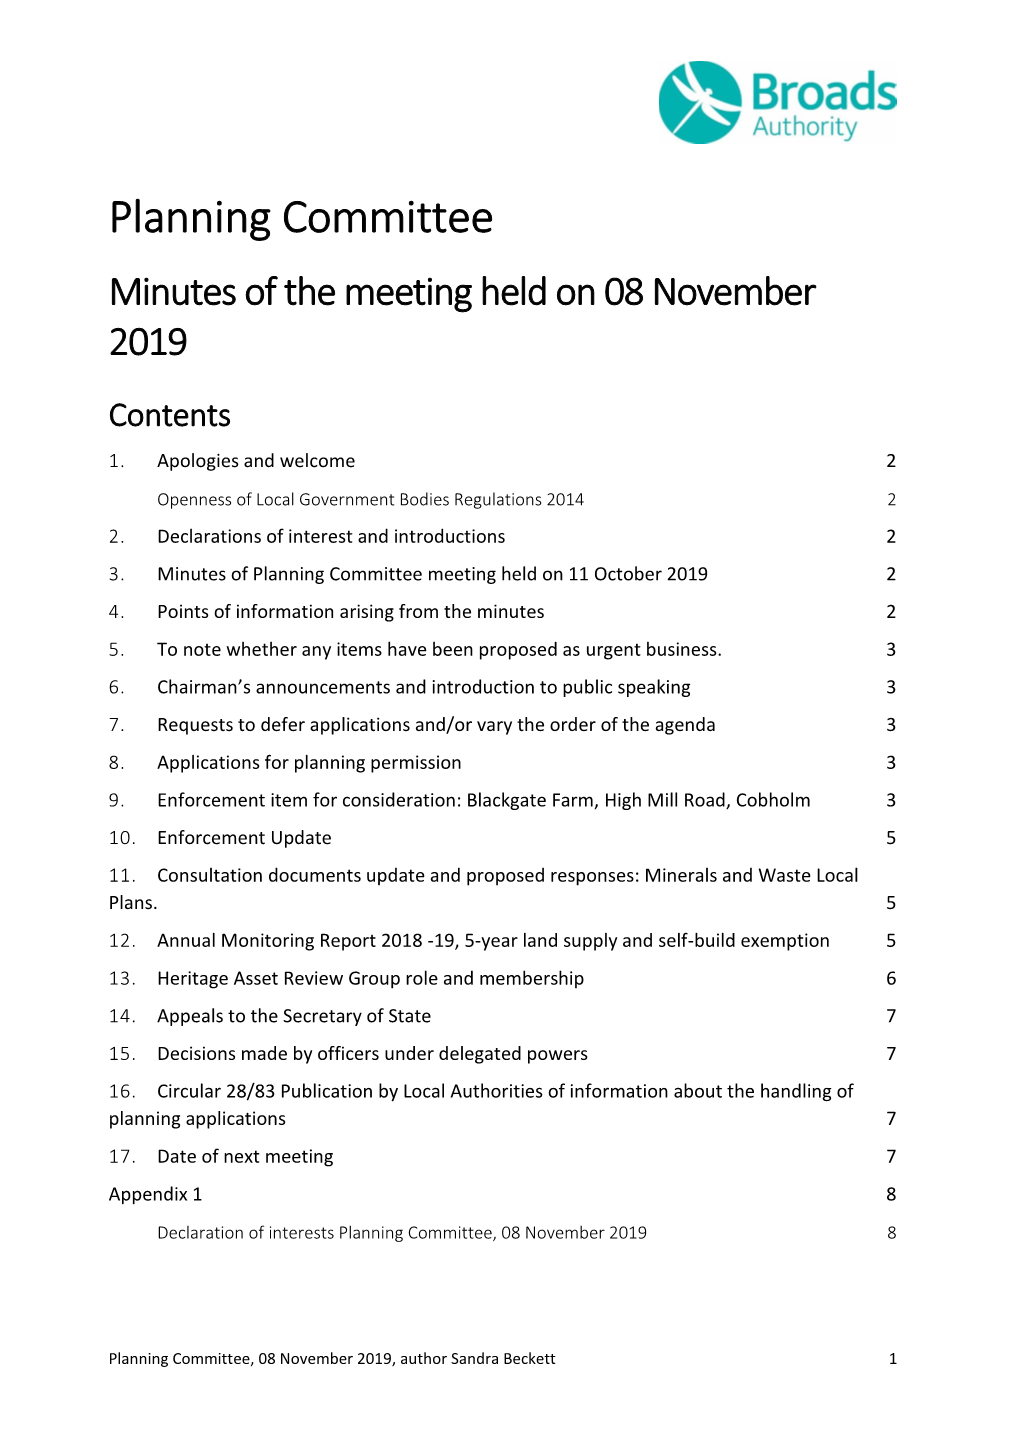 Planning Committee Minutes of the Meeting Held on 08 November 2019